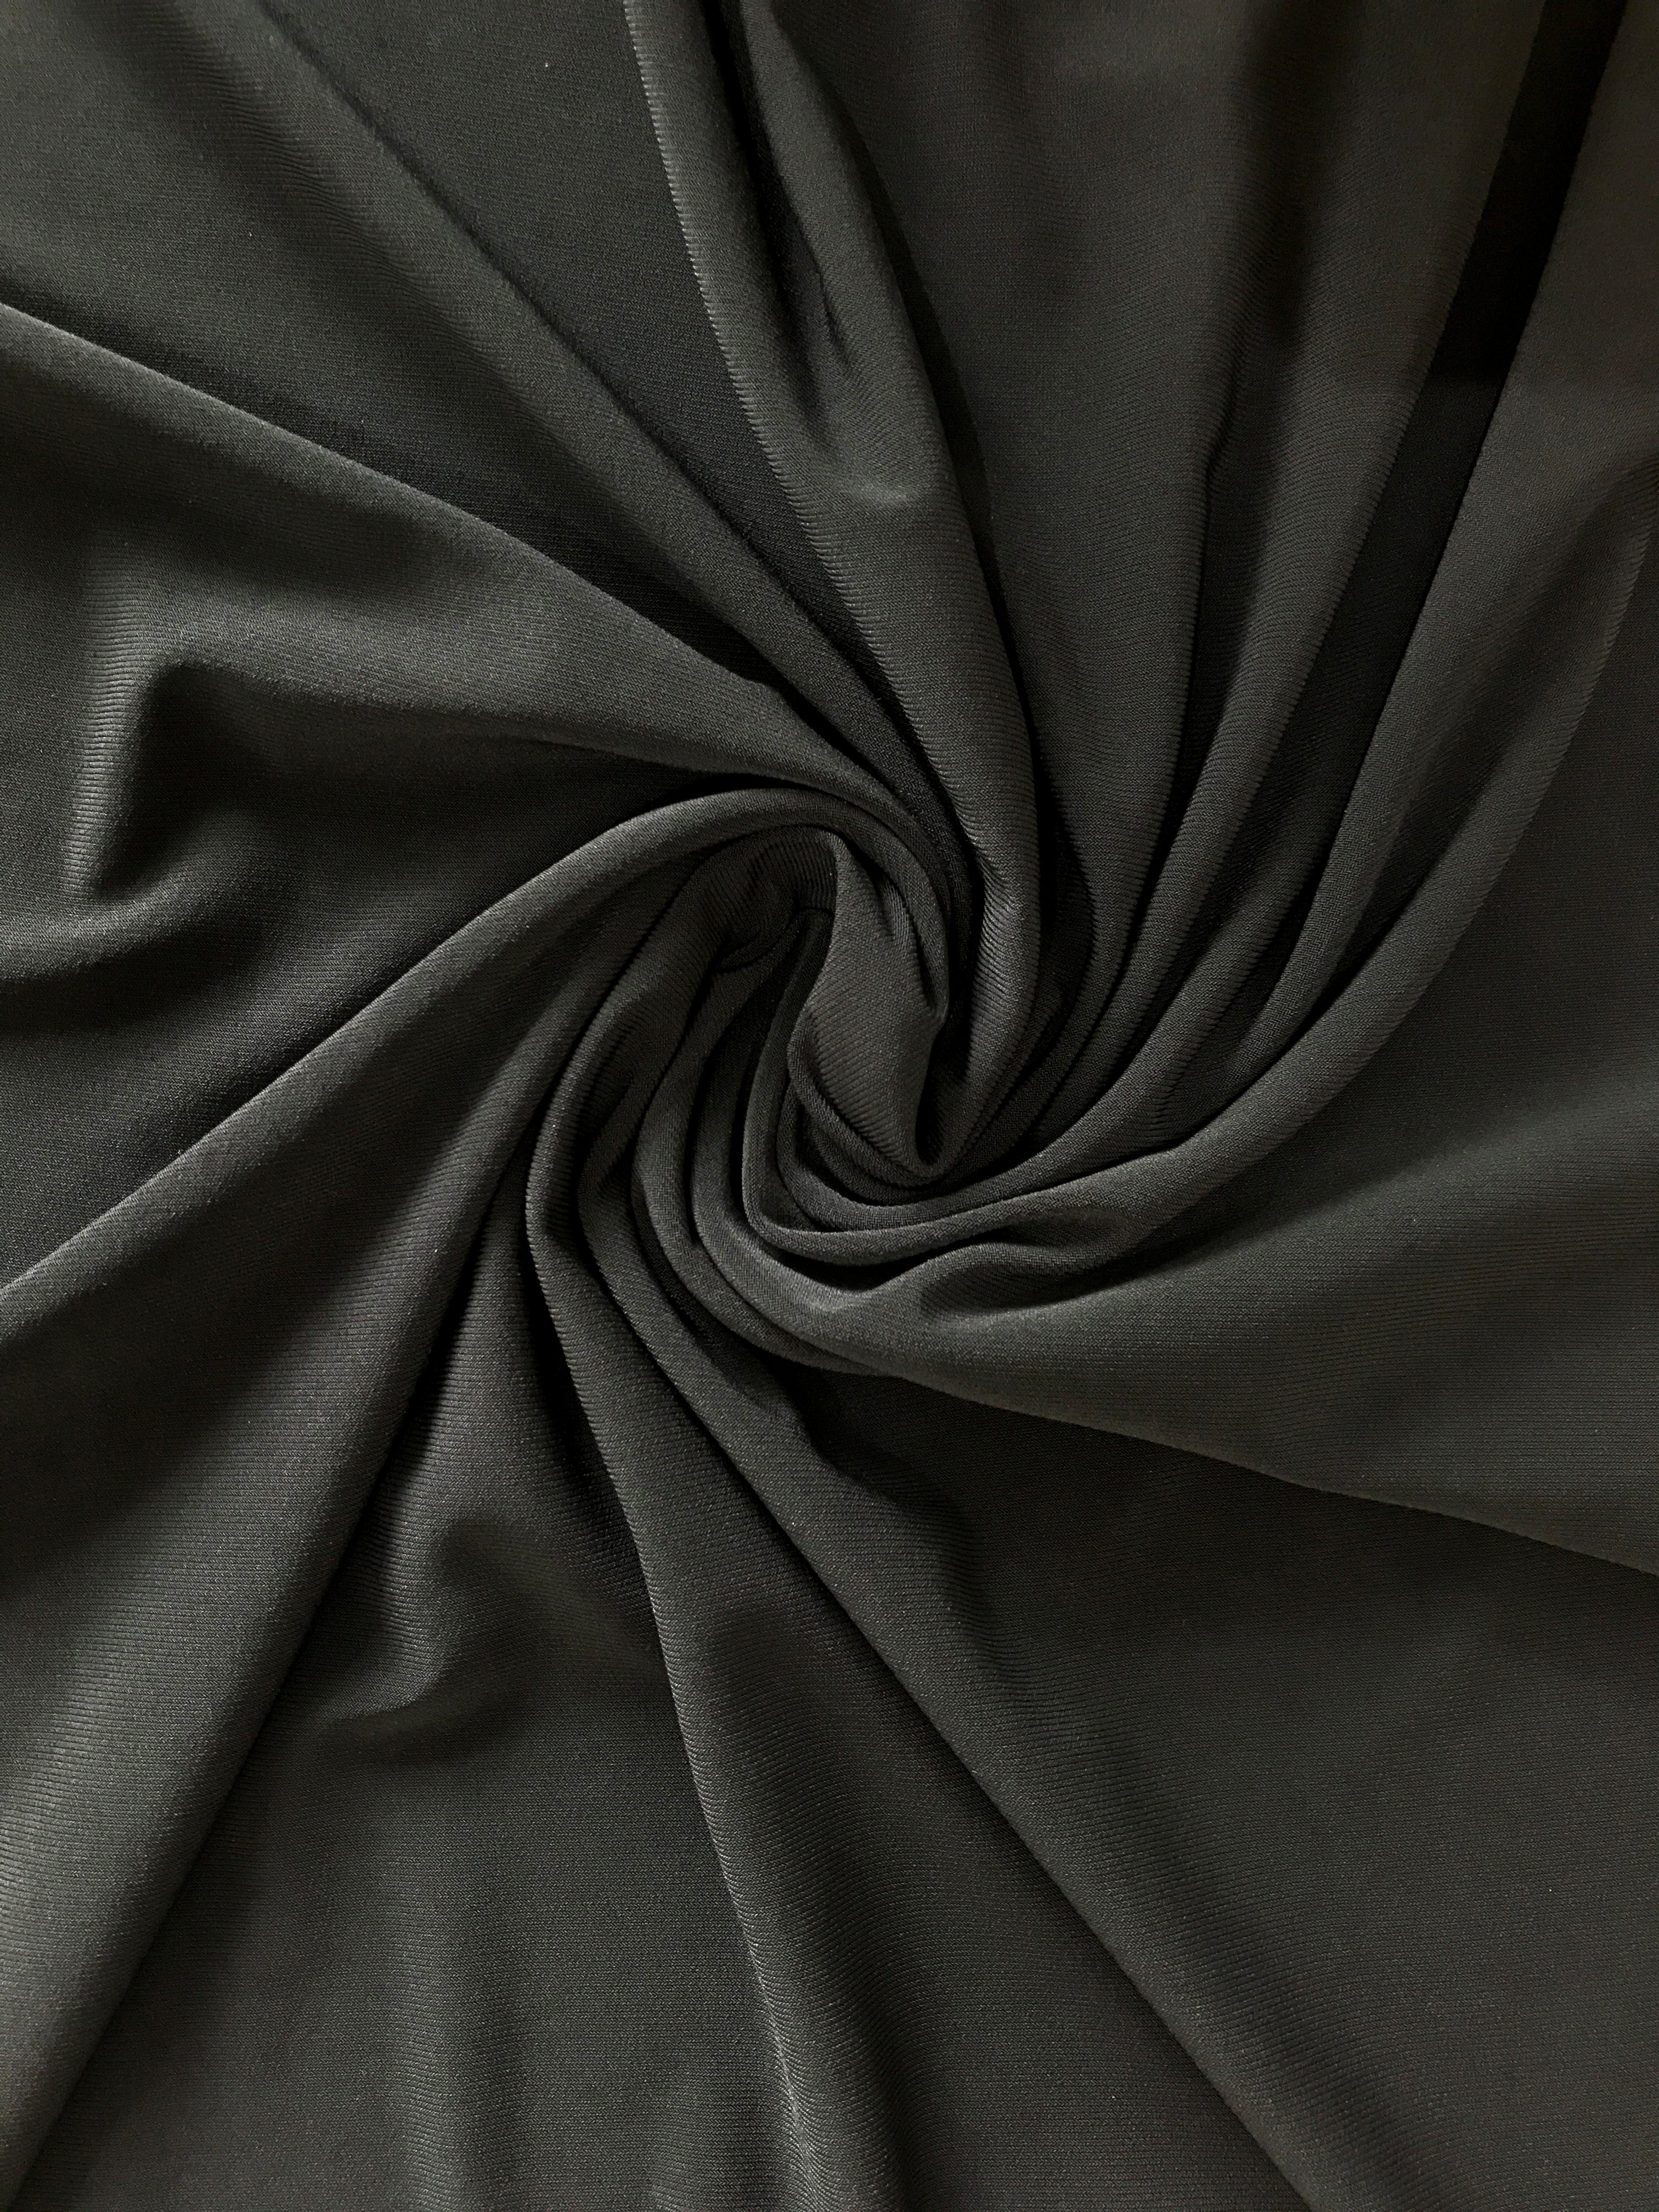 Everything You Need to Know About Jersey Fabric